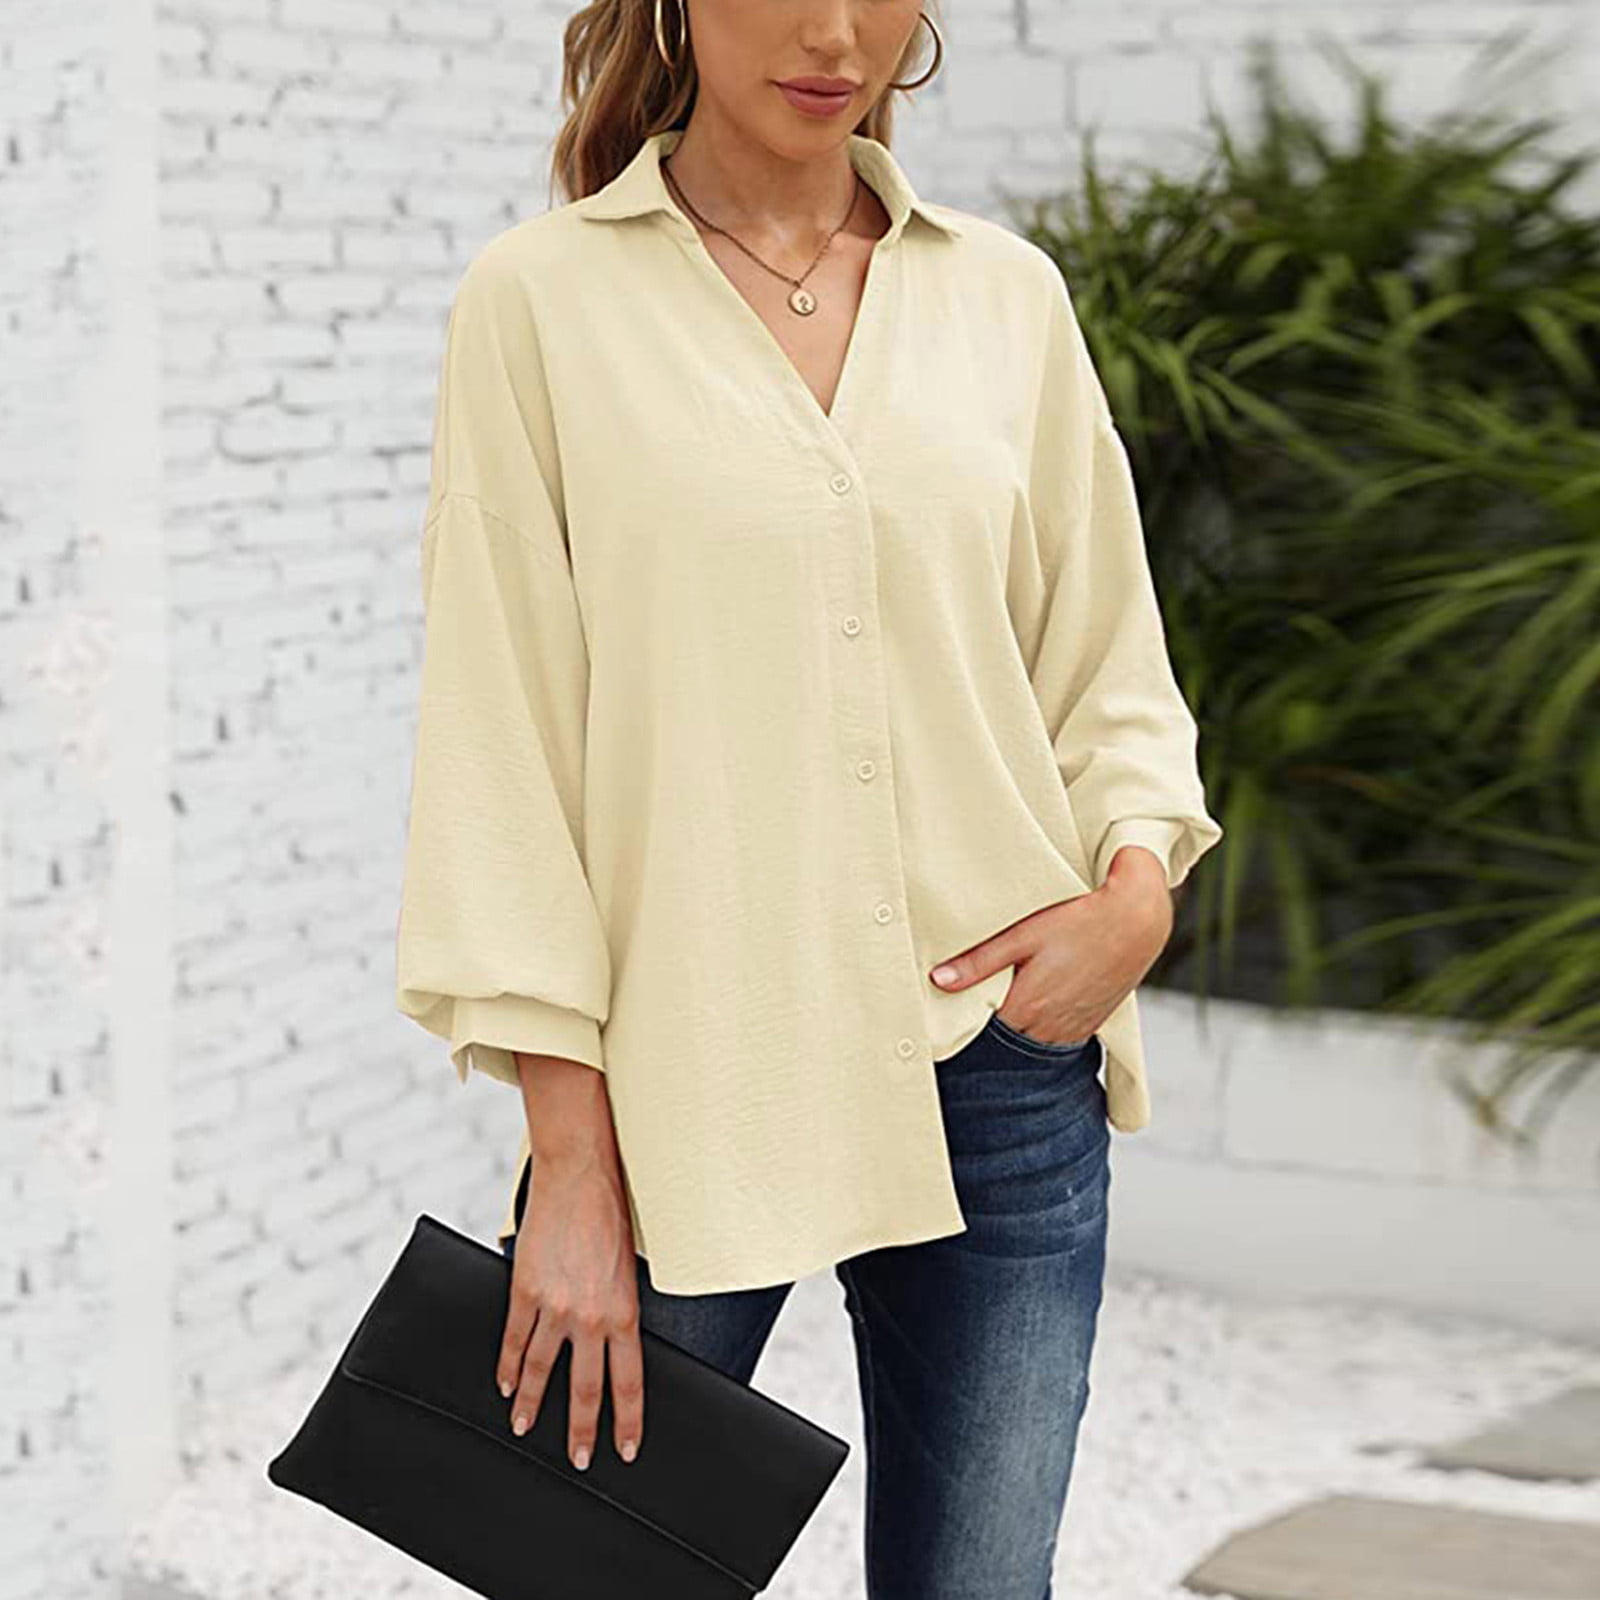 JDEFEG Womens Casual Work Tops Womens Summer Tops Bat Sleeve Lapel Tee  Shirt Solid Color Casual Blouse Loose Shirts with Button Misses Tunic Tops  95%